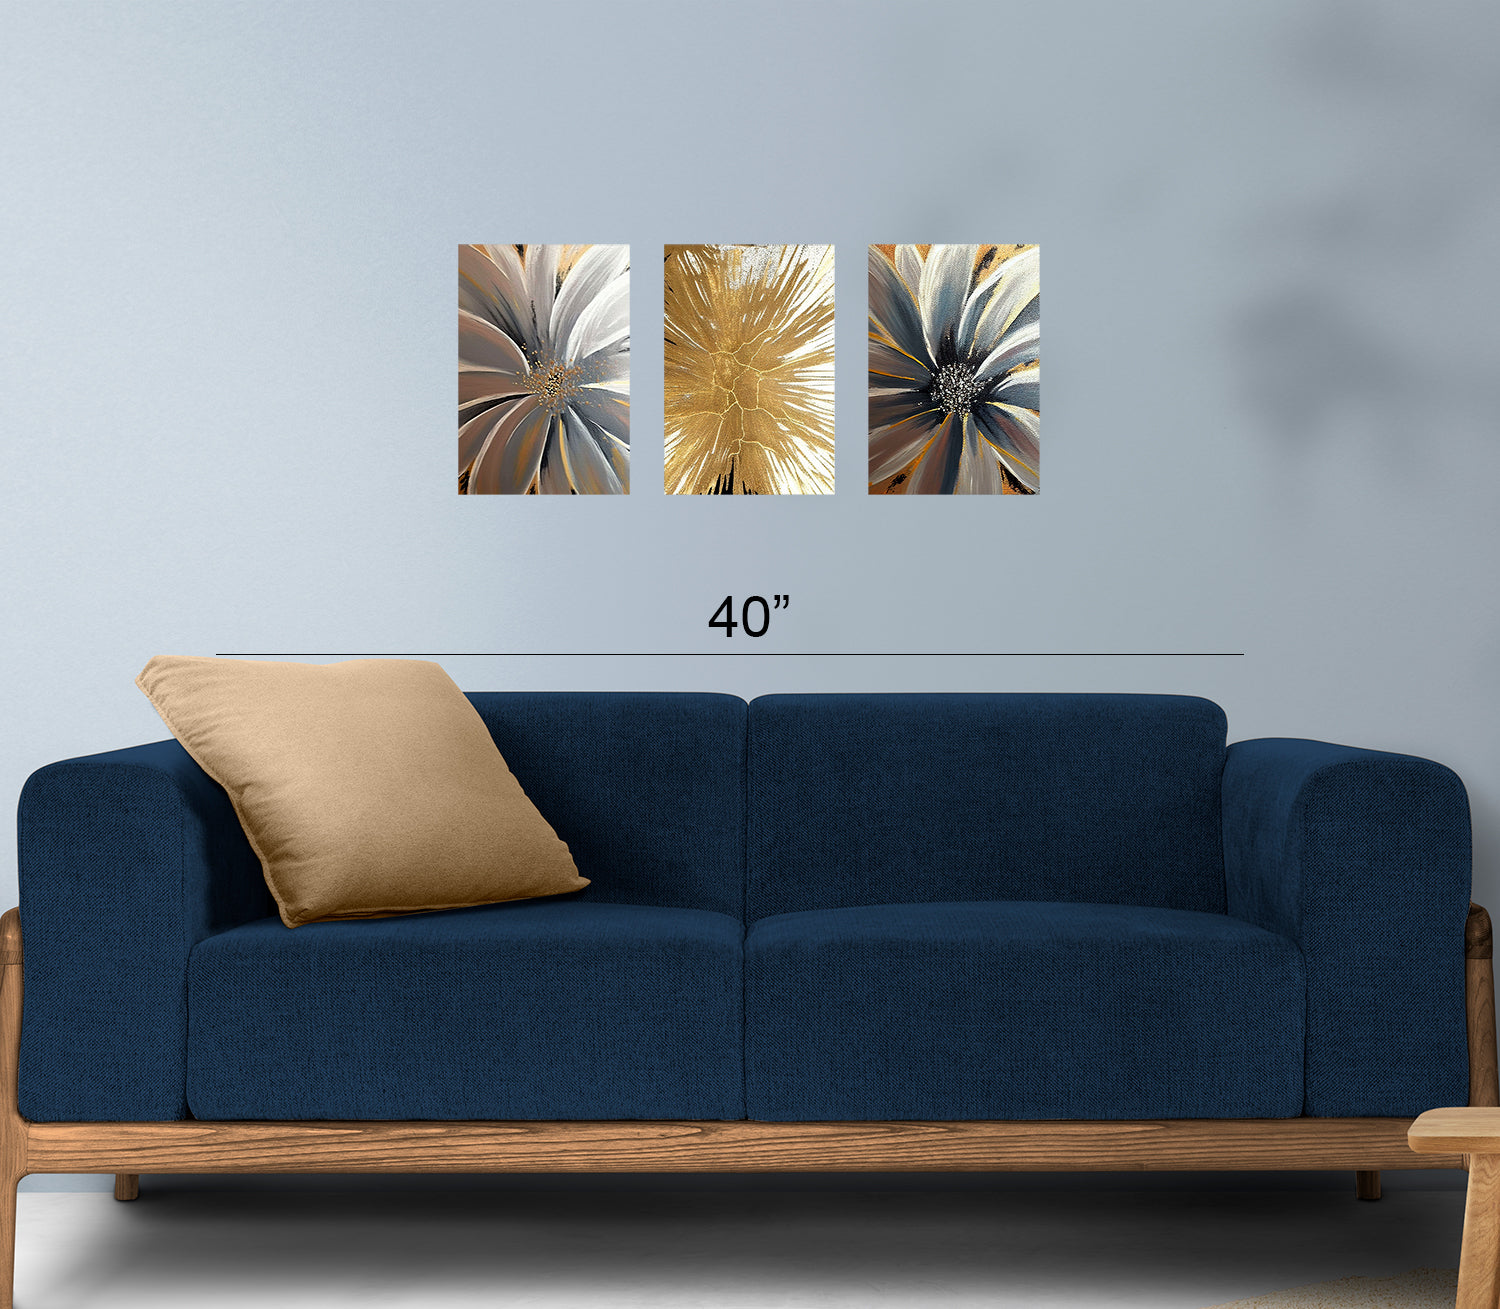 Beautiful Flower Abstract Art on Canvas 3 pcs Traditional Art - 0